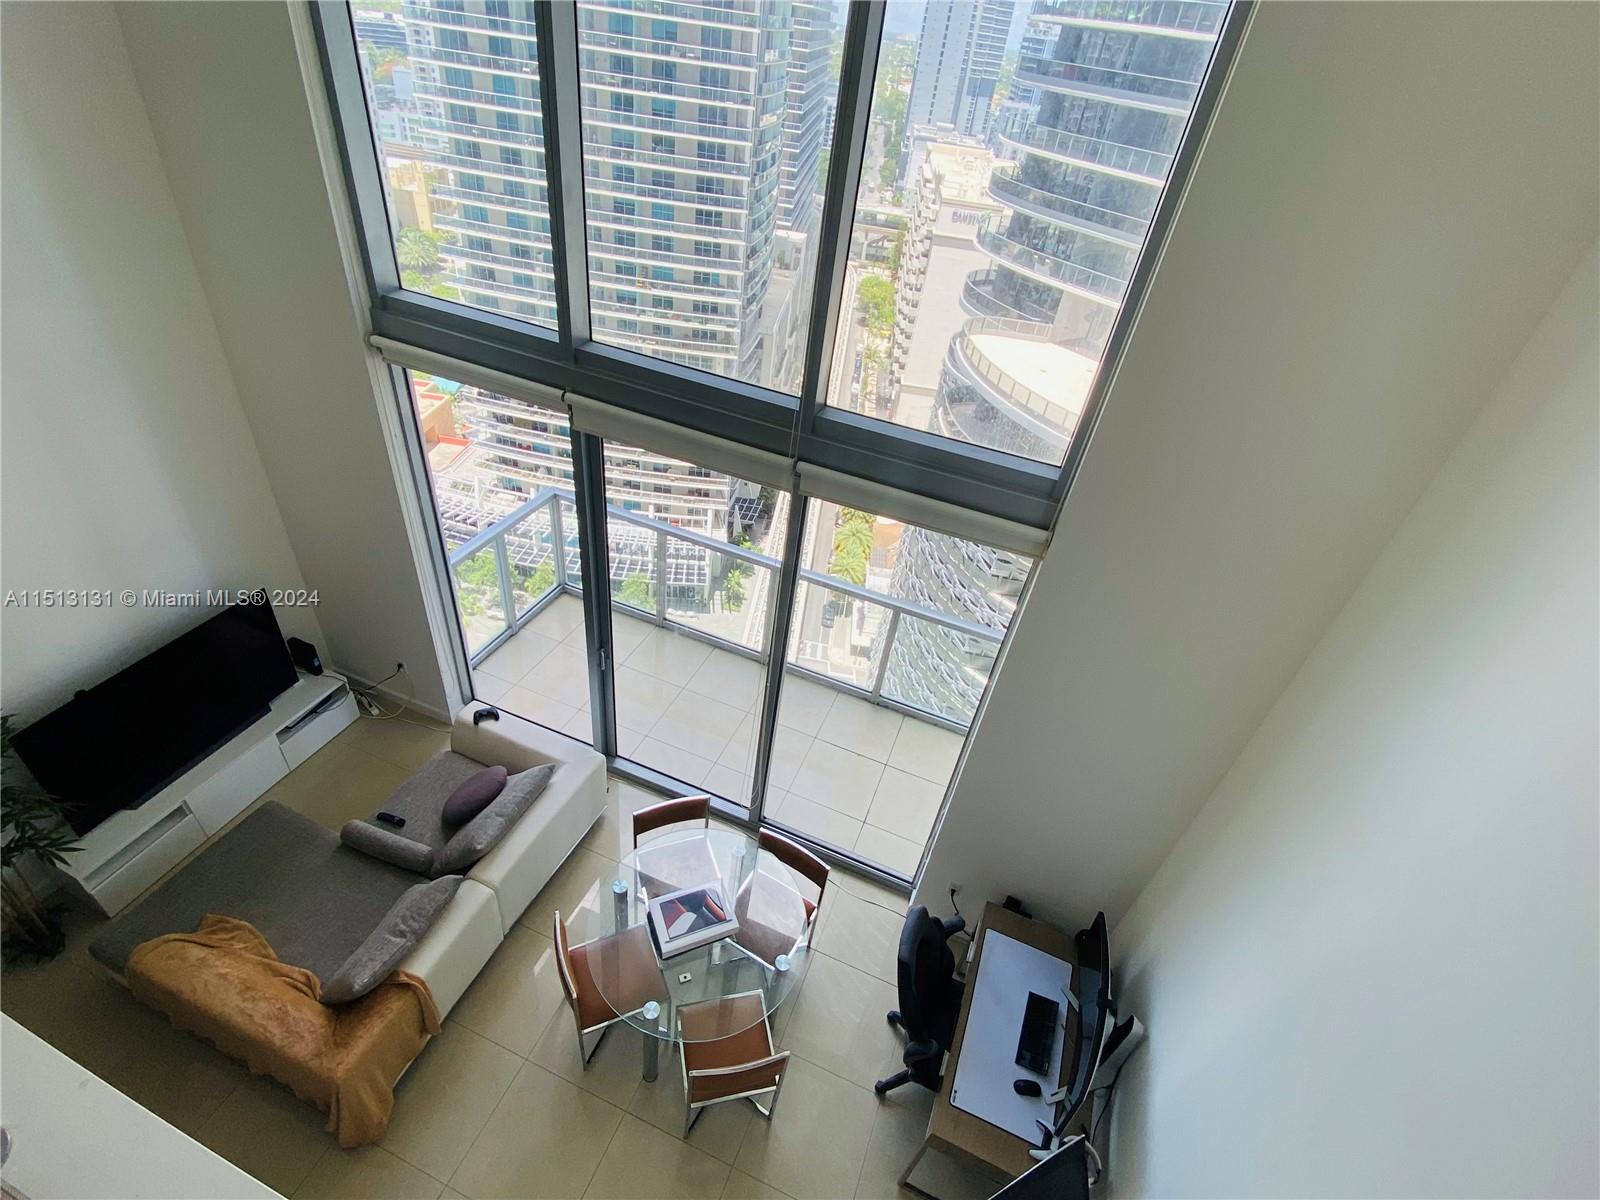 Rare two story apartment located in the heart of Brickell. Extraordinary layout: kitchen, living room and half bath downstairs. Breathtaking skyline views. Freshly painted with recently renovated kitchen and bathroom. Designated parking & twenty four hour doorman and valet parking. The building also offers a gym, pool, billiards room and much more. Downstairs you will find all of Brickell's main attractions at the tip of your fingers. The building has two entrances, by Brickell Ave. & S.Miami Ave. Great investment opportunity